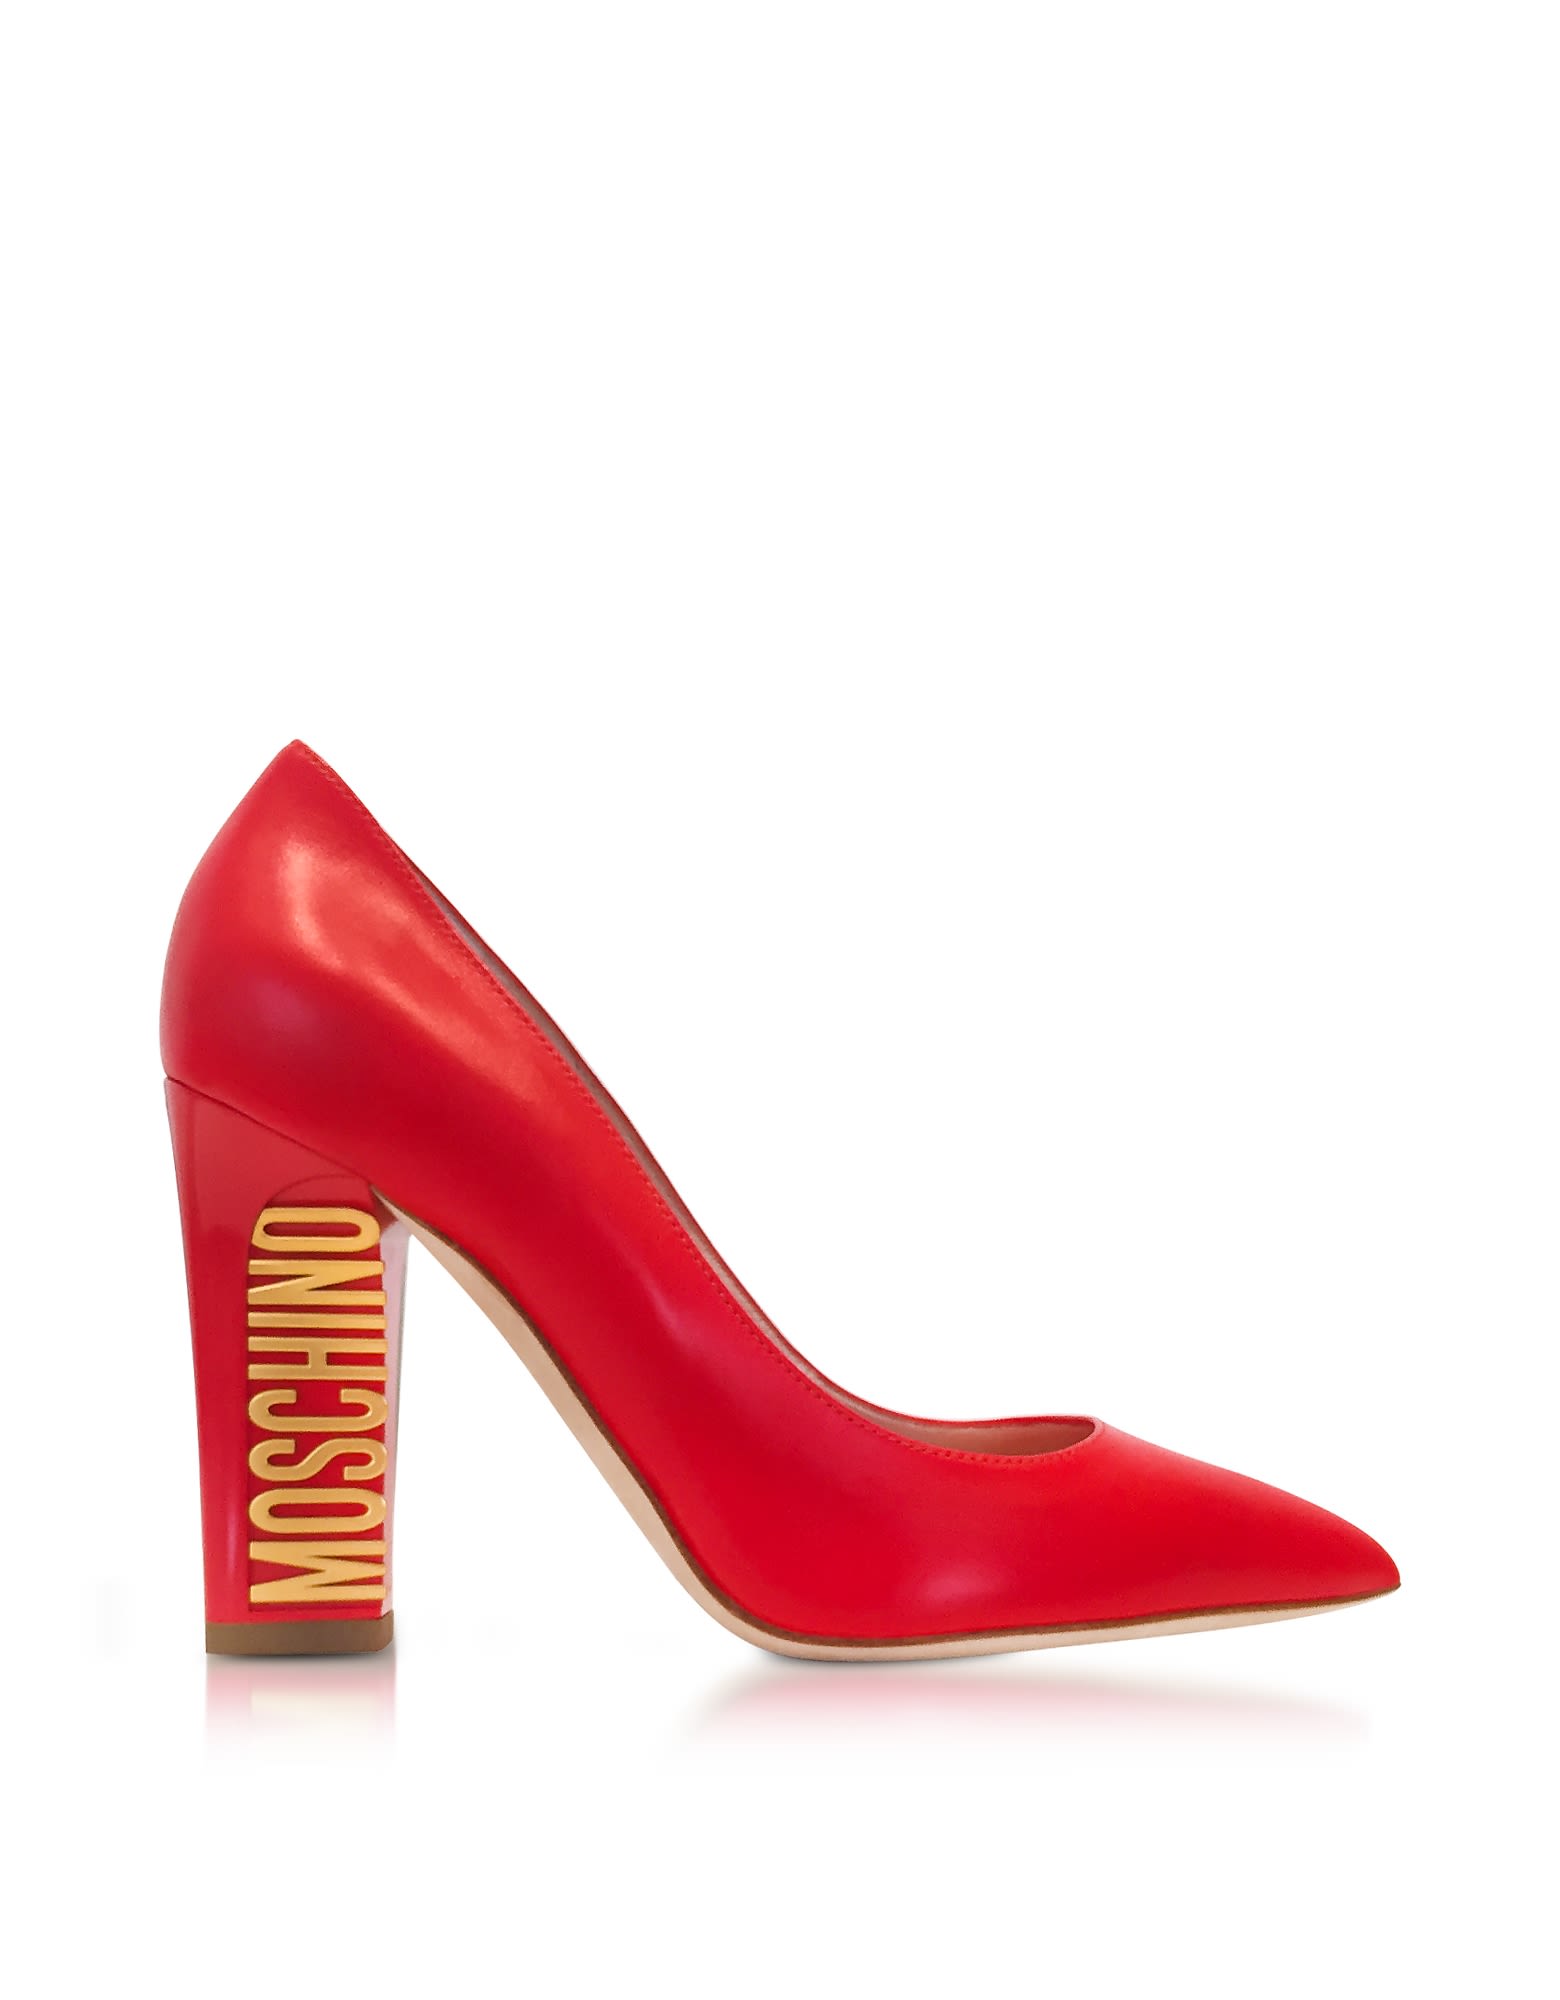 MOSCHINO GOLD TONE LOGO HEEL RED LEATHER PUMPS,10591299